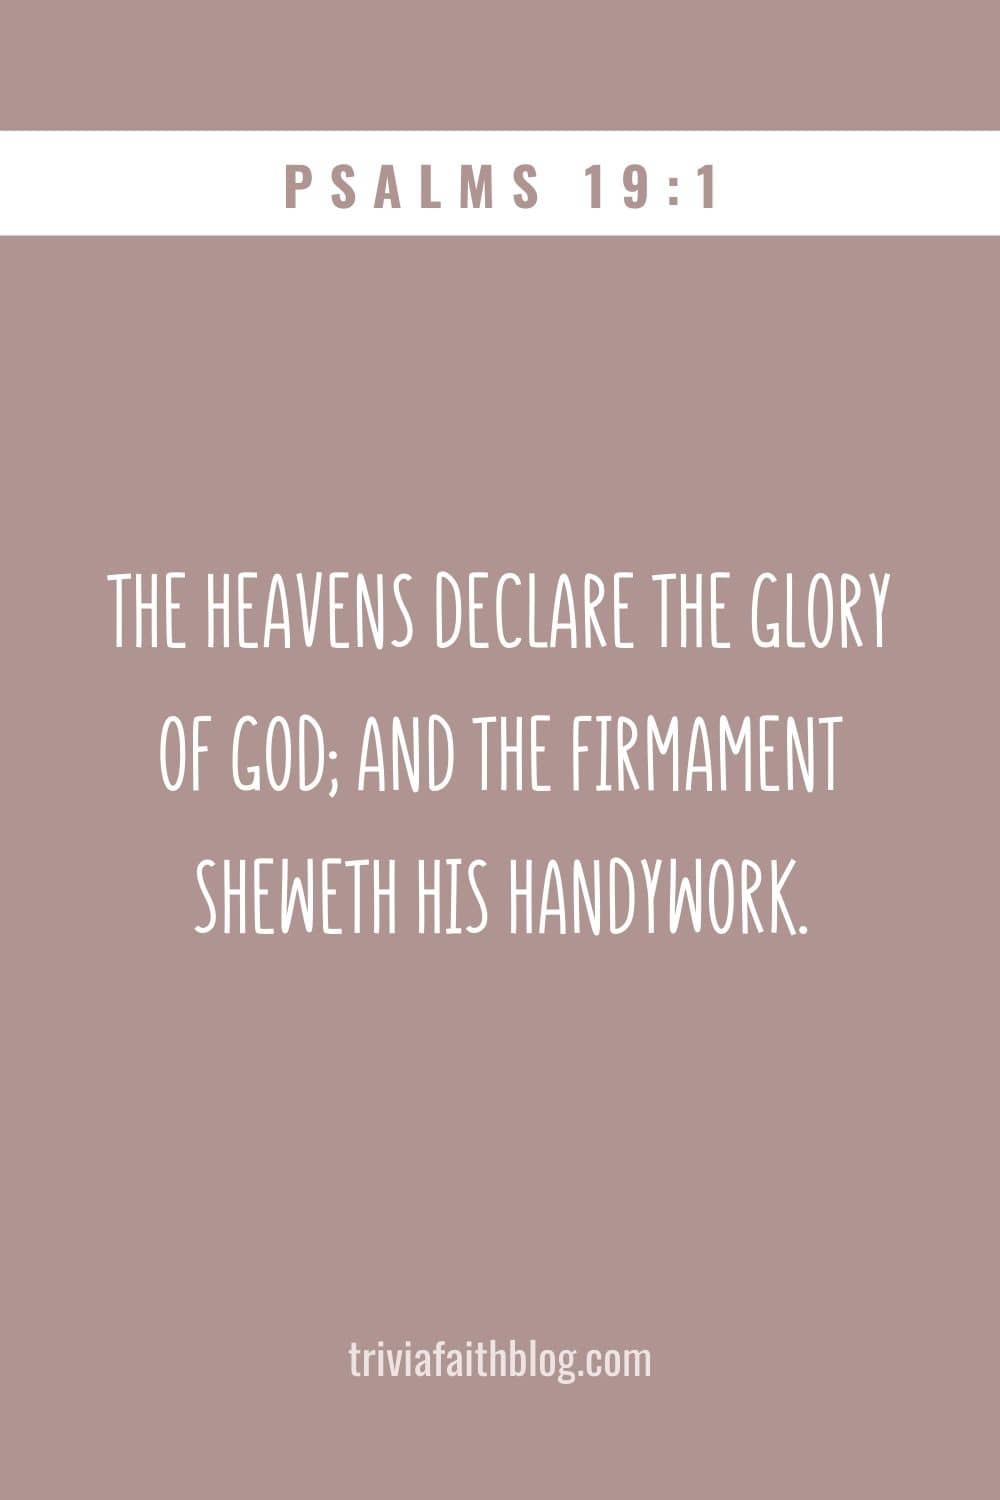 The heavens declare the glory of God; and the firmament sheweth his handywork